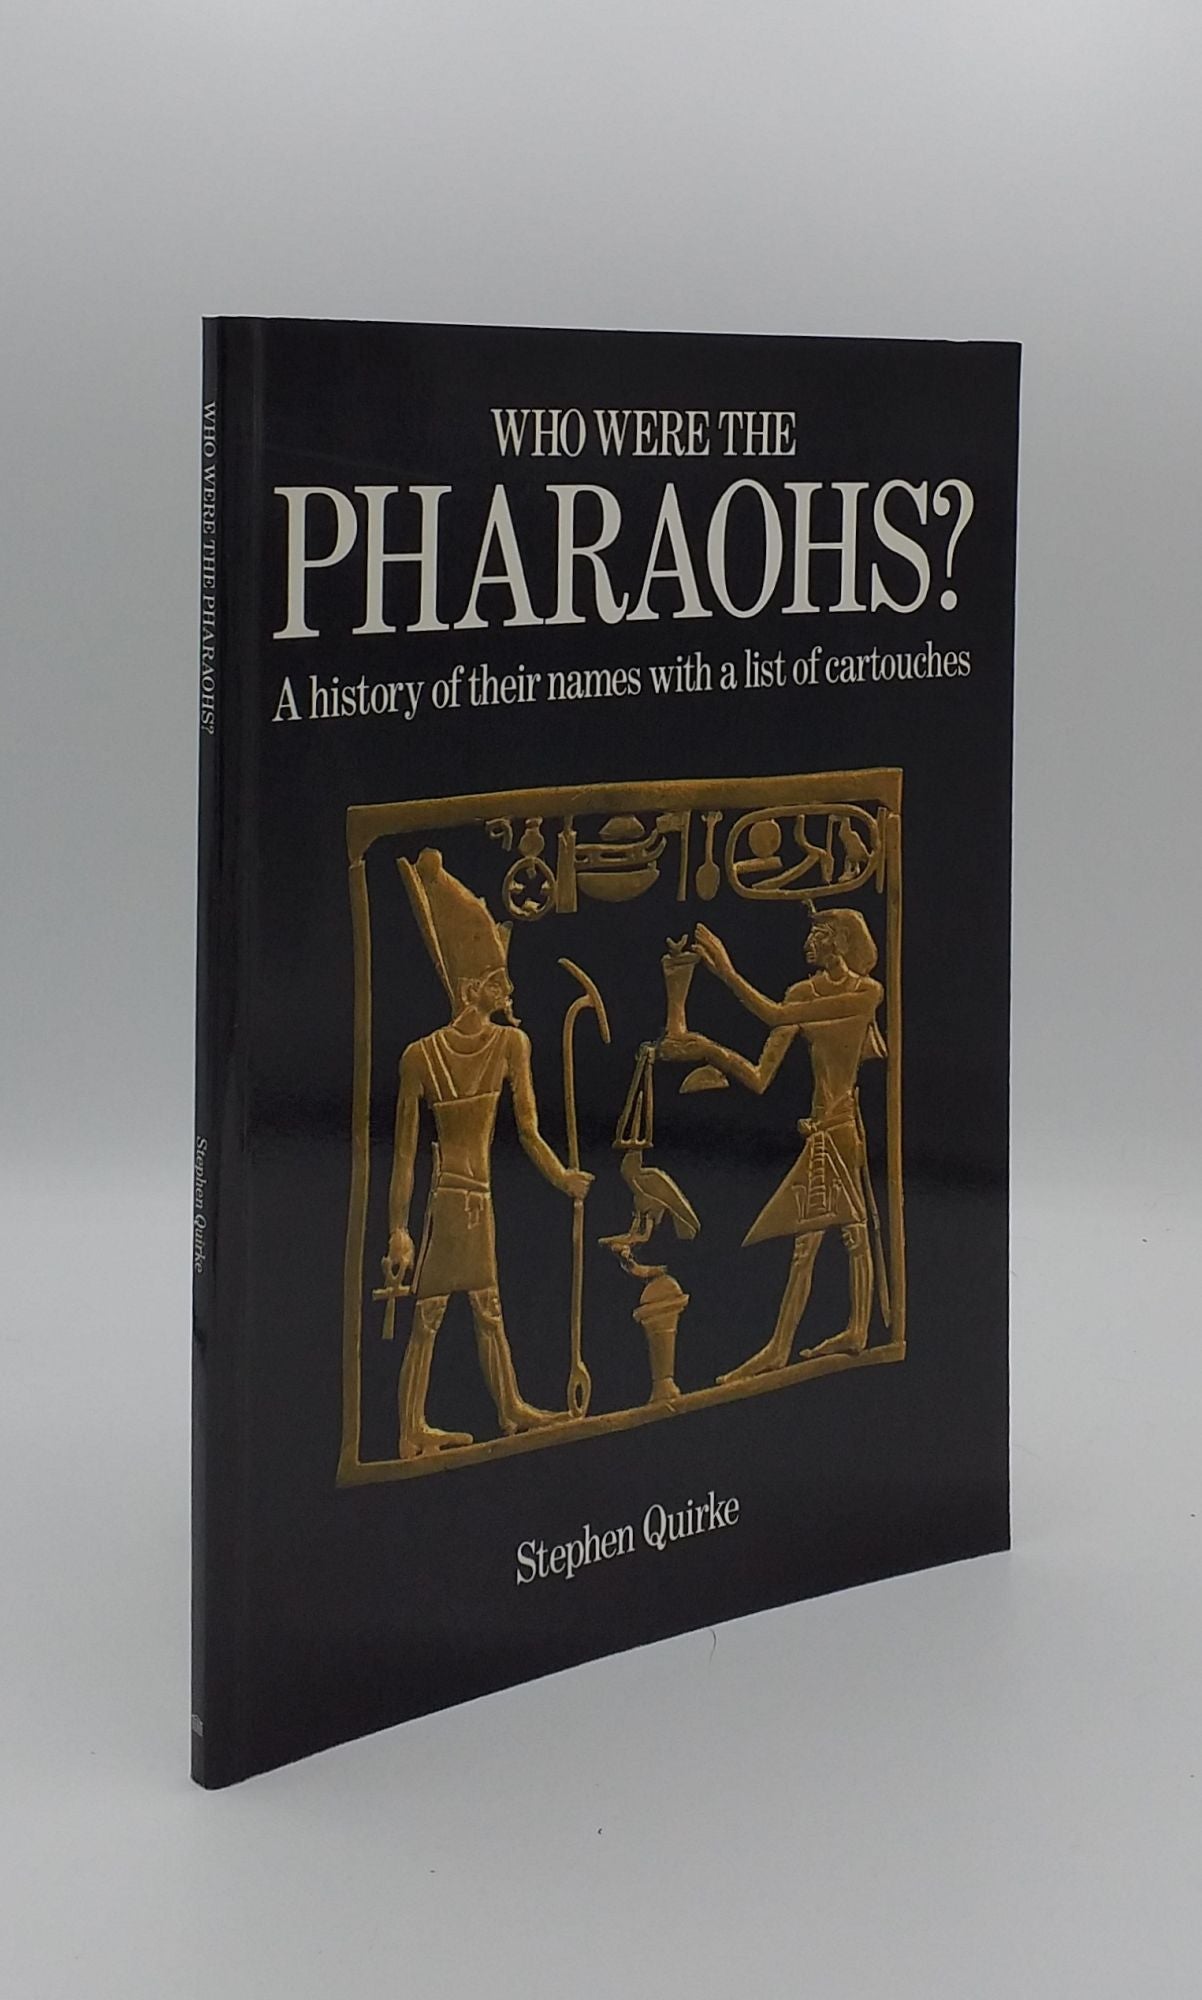 QUIRKE Stephen - Who Were the Pharaohs? a History of Their Names with a List of Cartouches